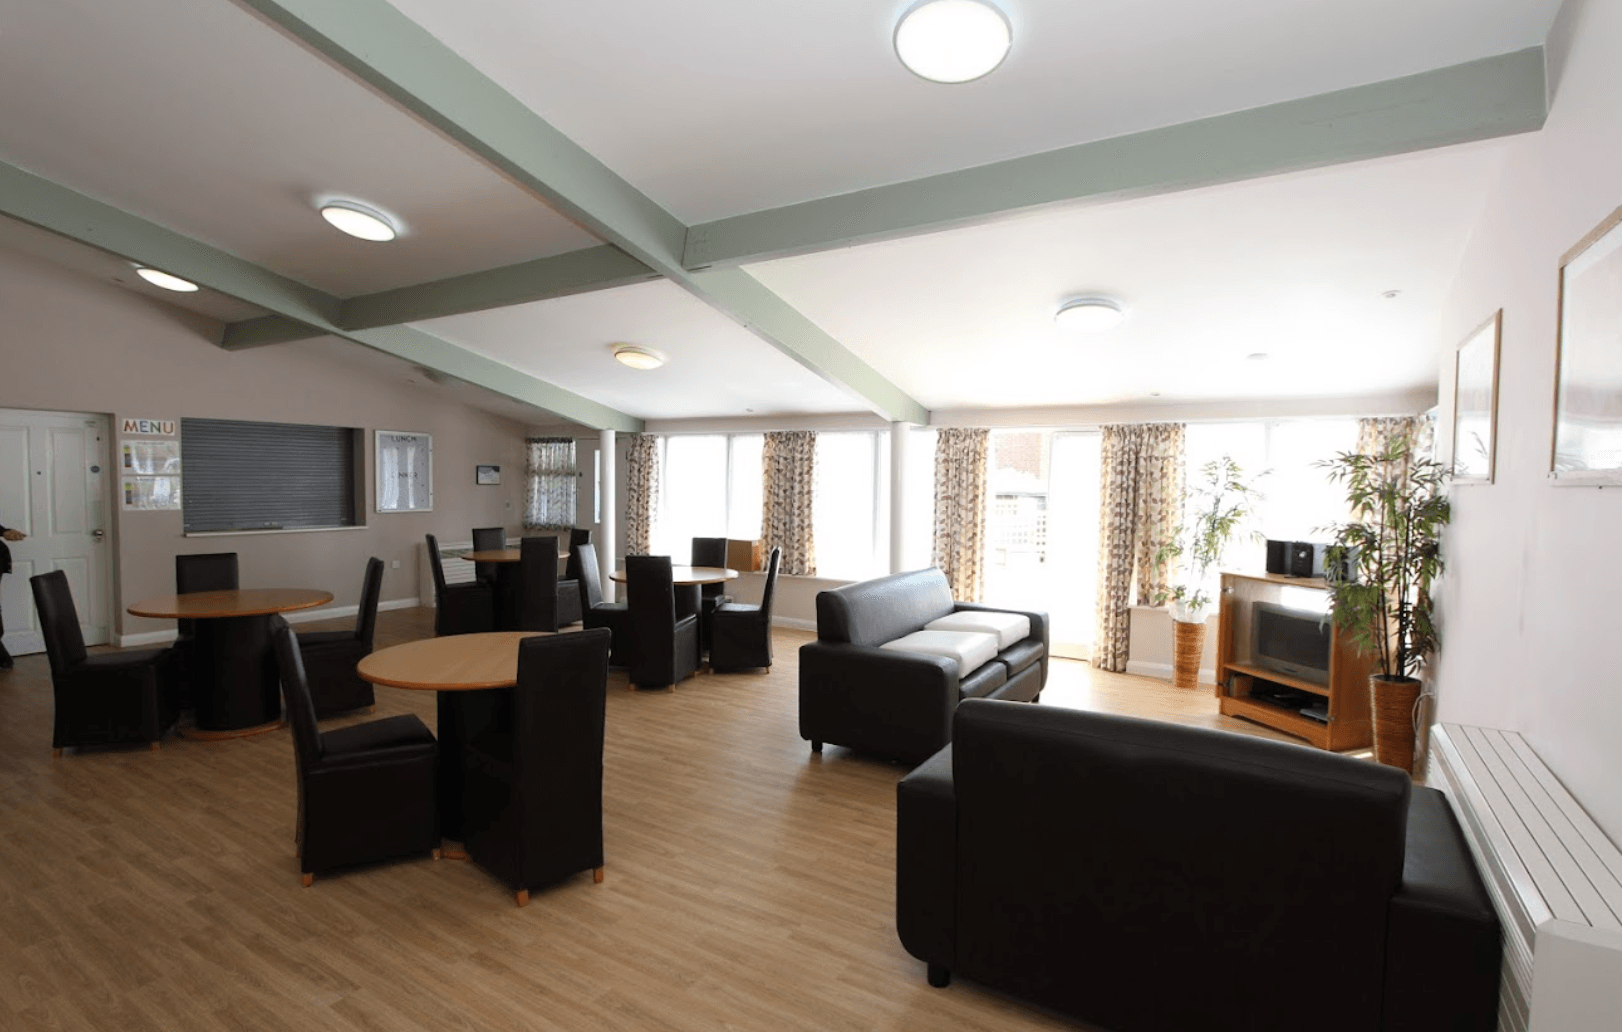 Shaw Healthcare - Wood House care home 002